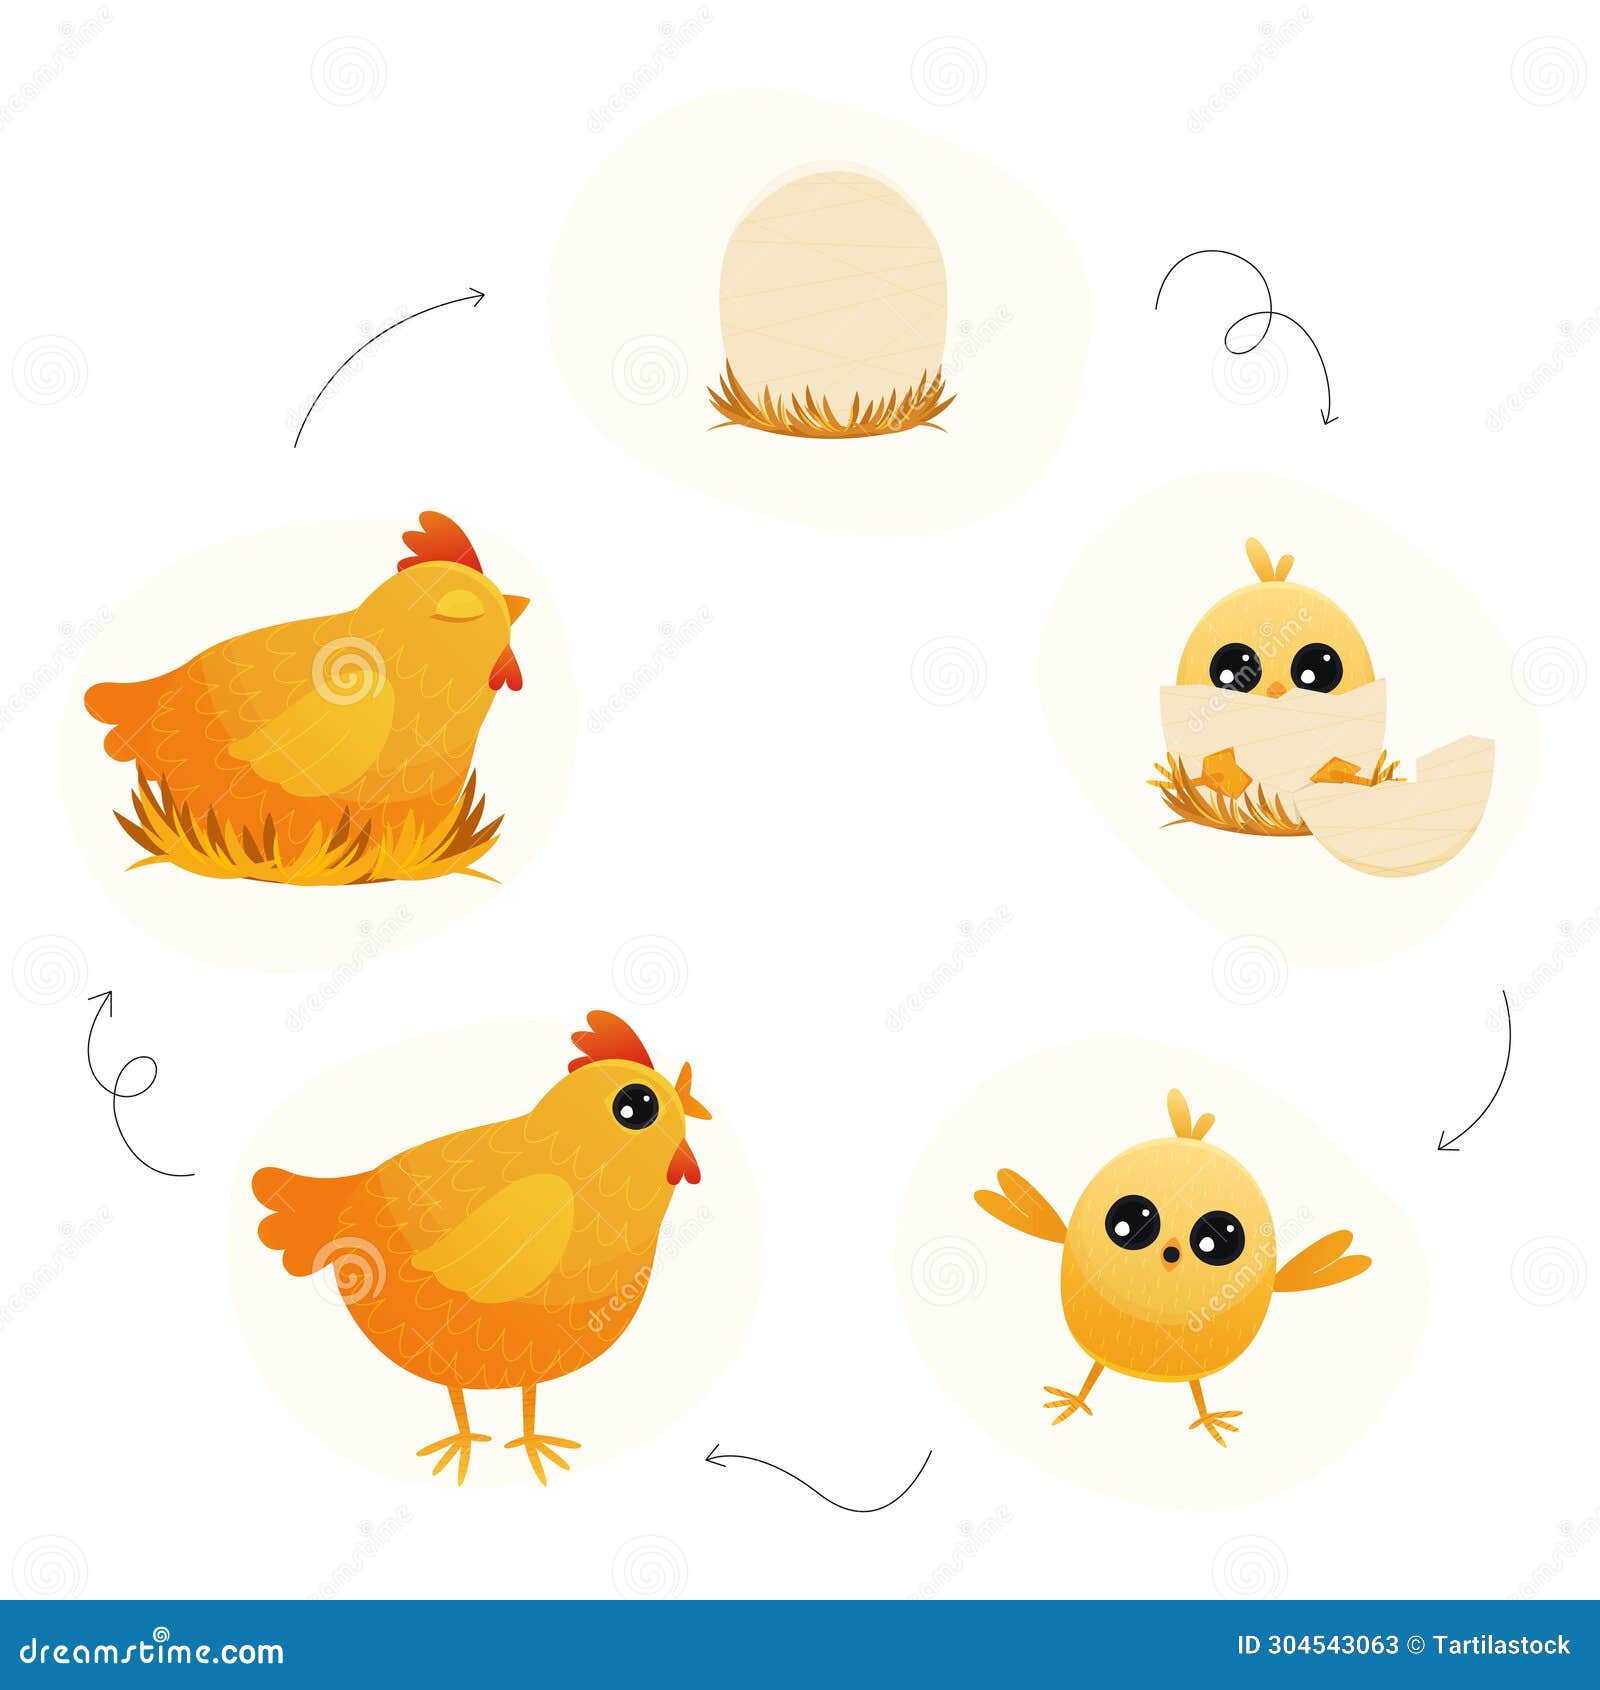 chicken life cycle. cartoon broody hen with chicks and eggs, step by step from egg to adult and back, chicken embryo to